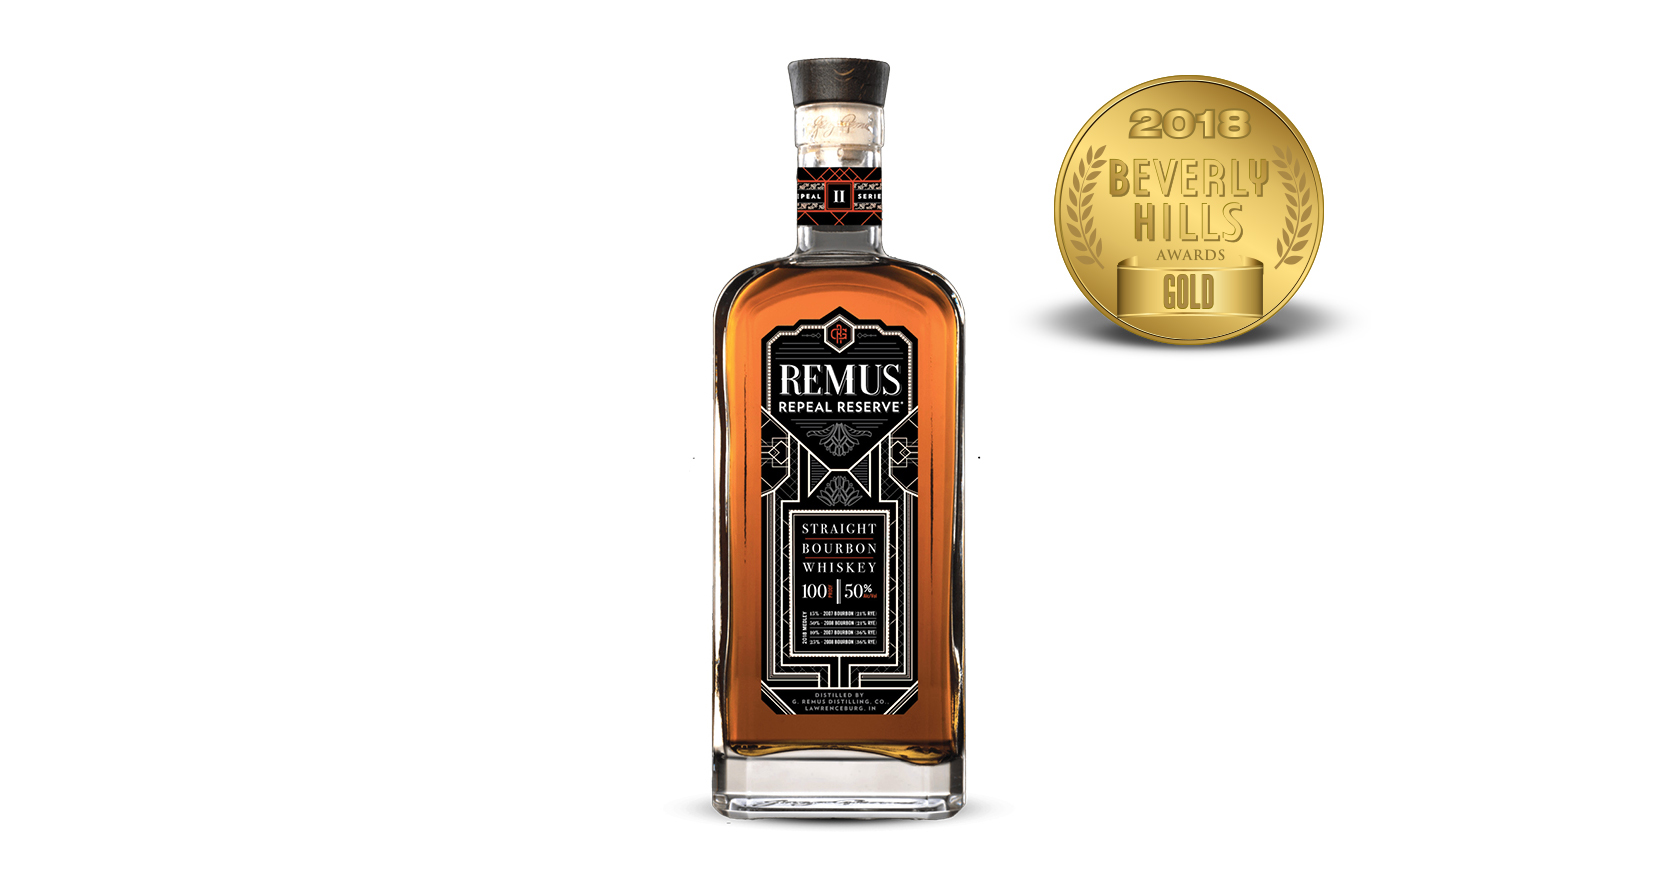 Remus Repeal Reserve Series II Straight Bourbon Whiskey